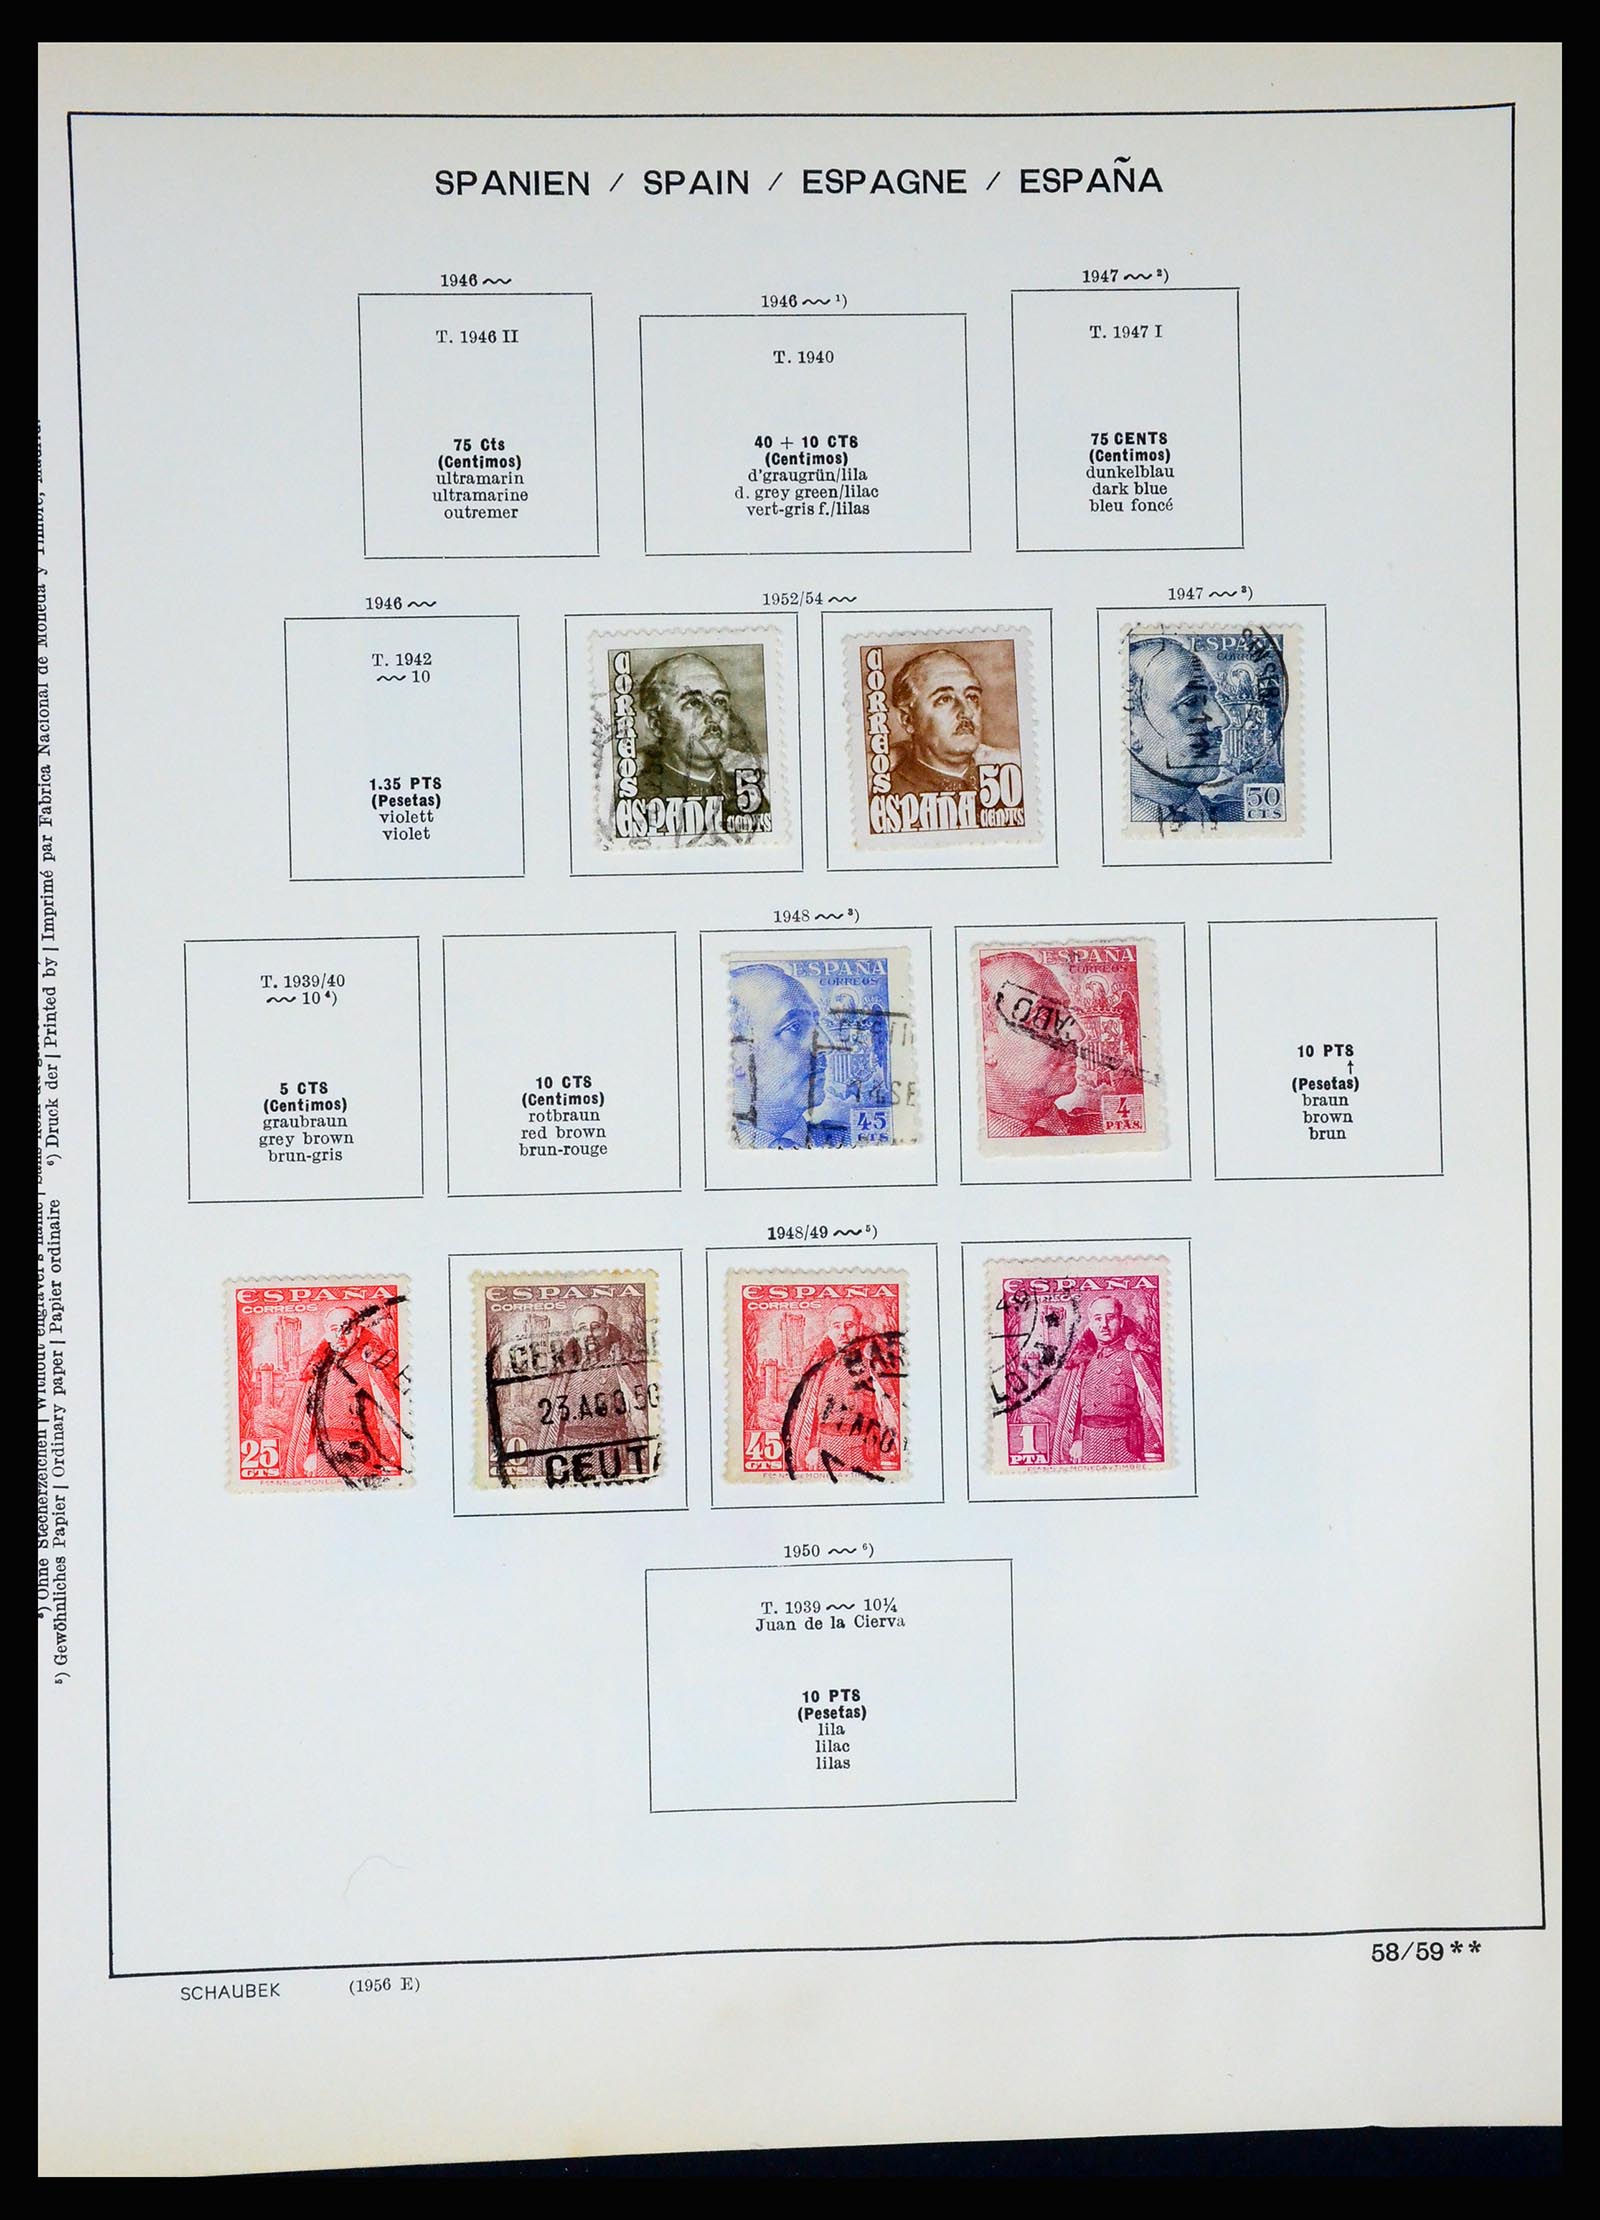 37268 063 - Stamp collection 37268 Spain 1850-1991.